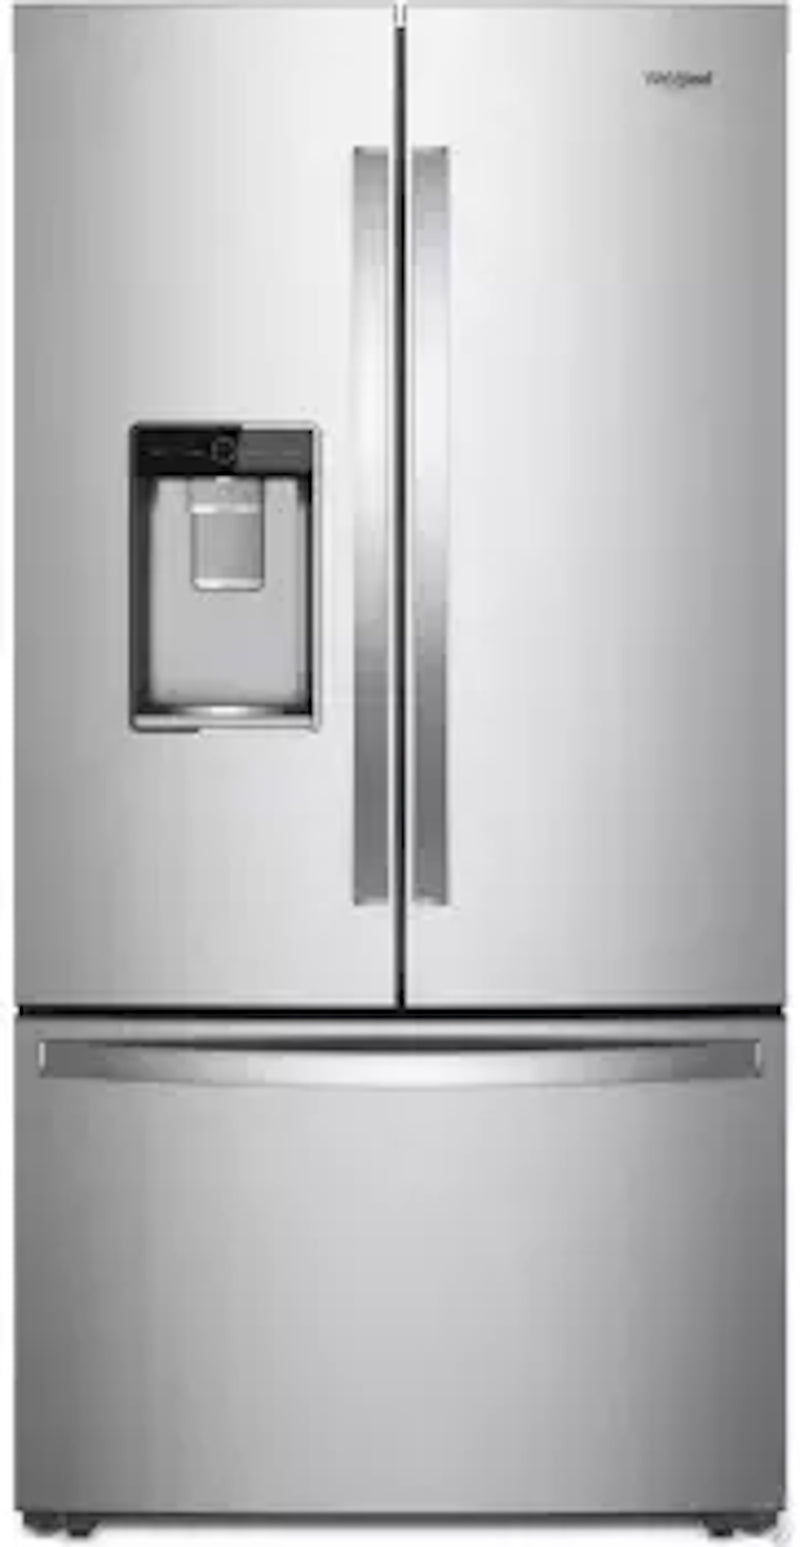 Whirlpool - 35.8125 Inch 24 cu. ft French Door Refrigerator in Stainless - WRF954CIHZ